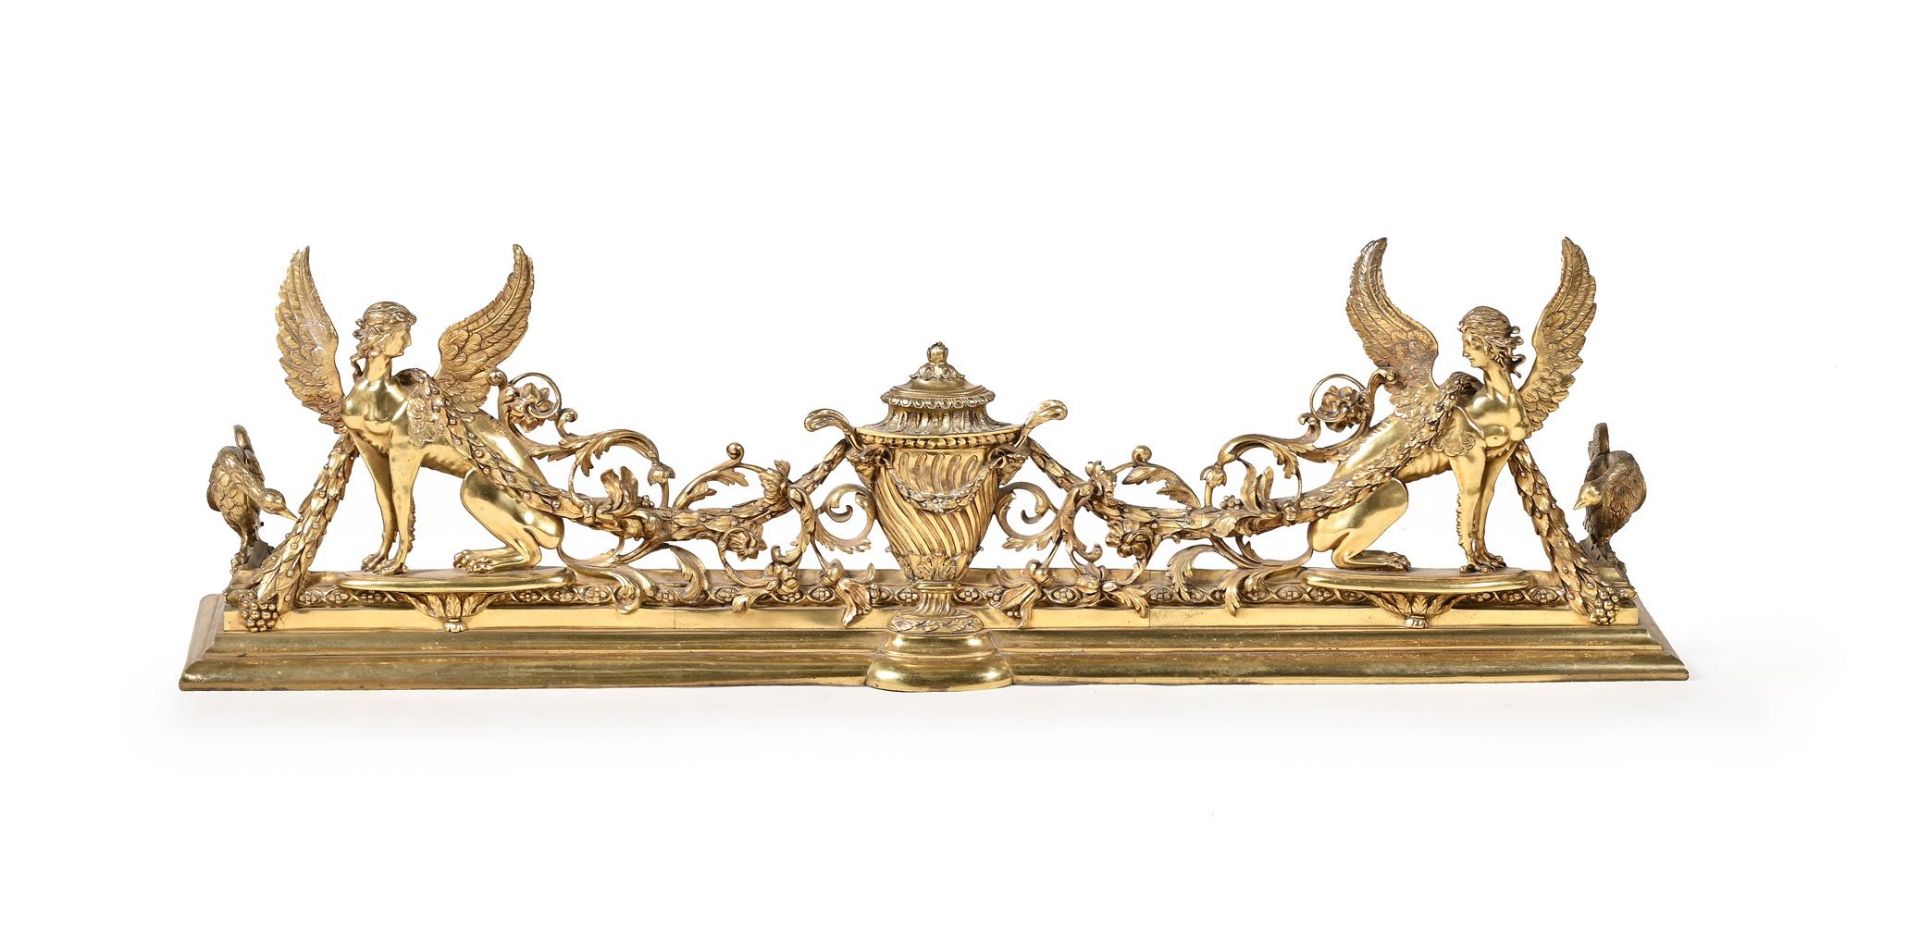 A SUBSTANTIAL BRASS FIRE FENDER, LATE 19TH OR EARLY 20TH CENTURY